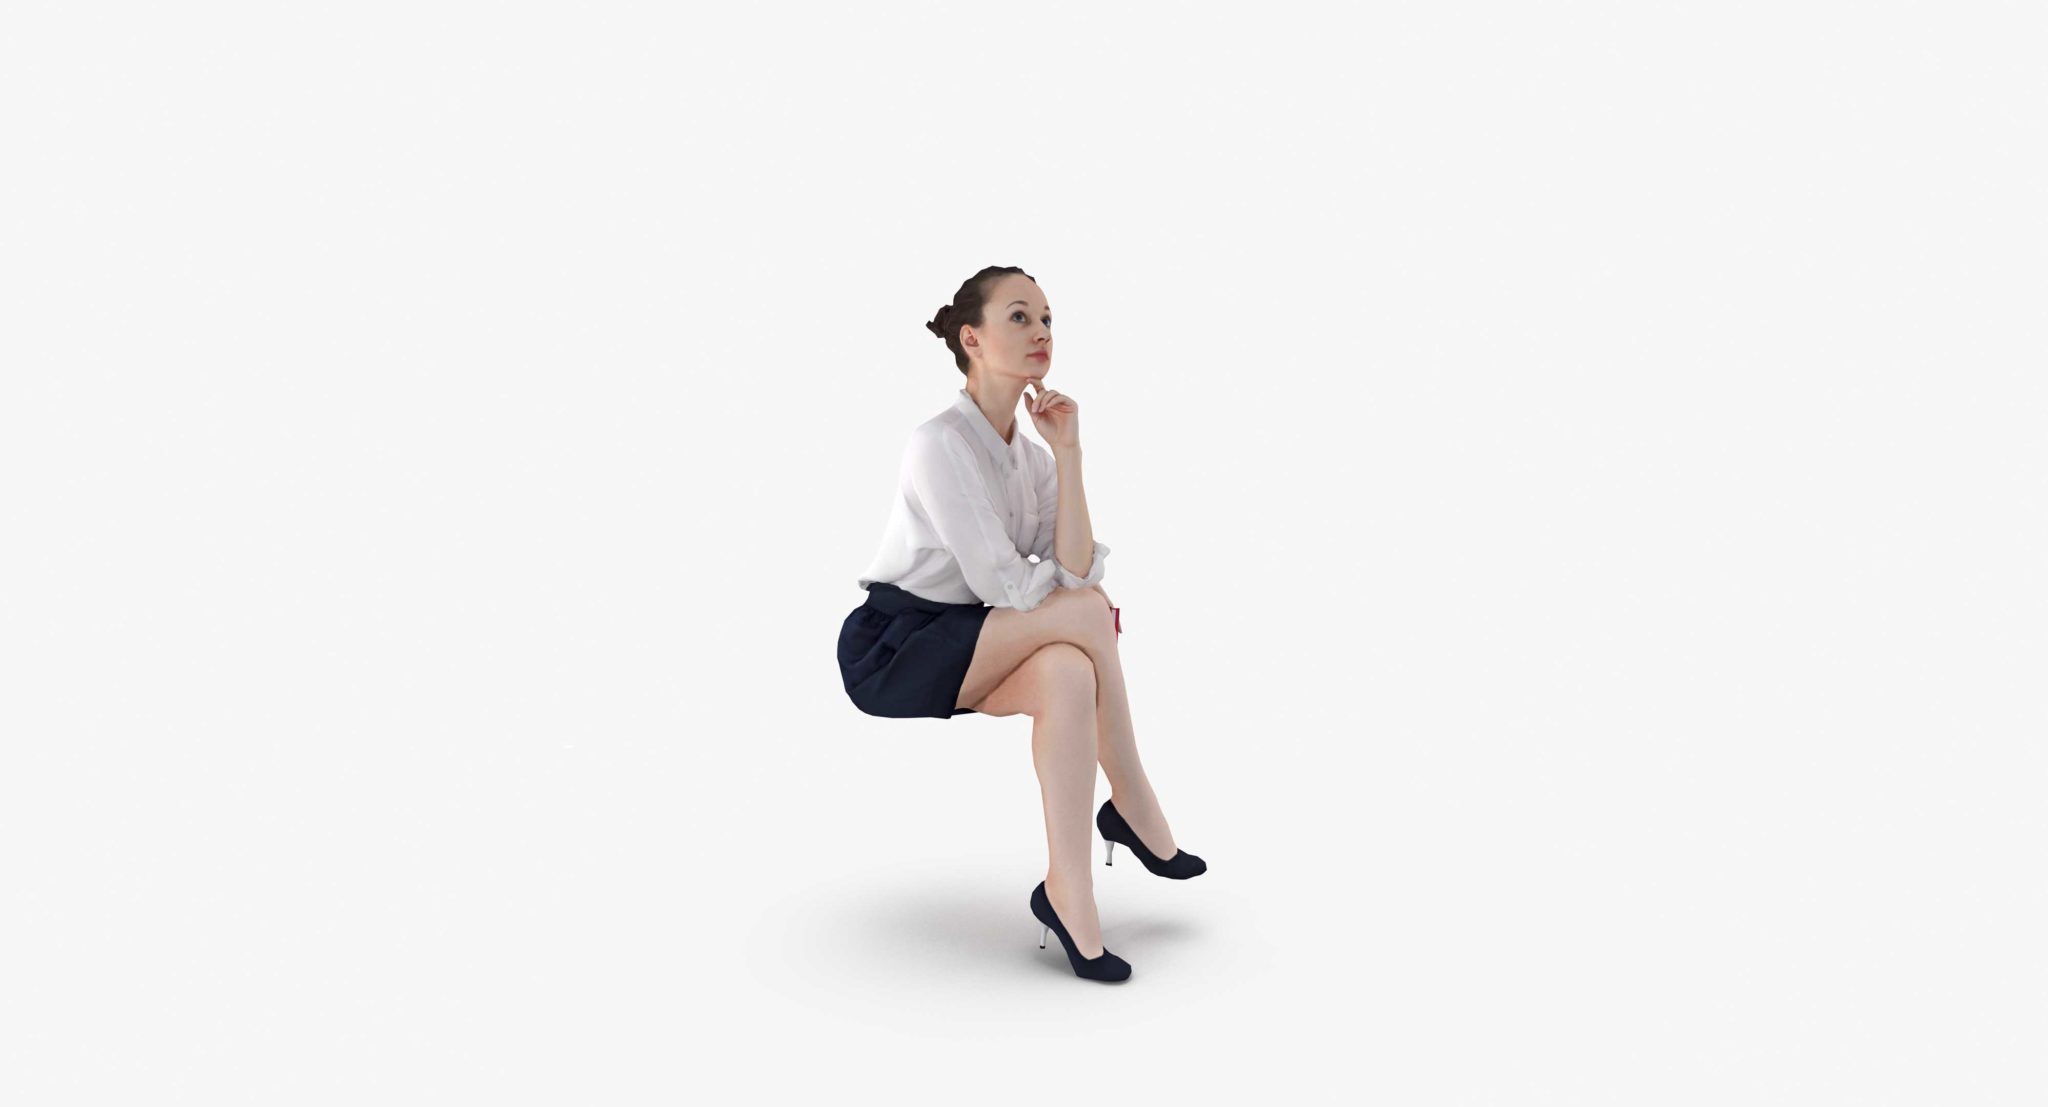 Business Woman Sitting 3D Model, for download files in 3ds, max, obj, fbx with low poly, game, and VR/AR options. Ready for 3D Printing.